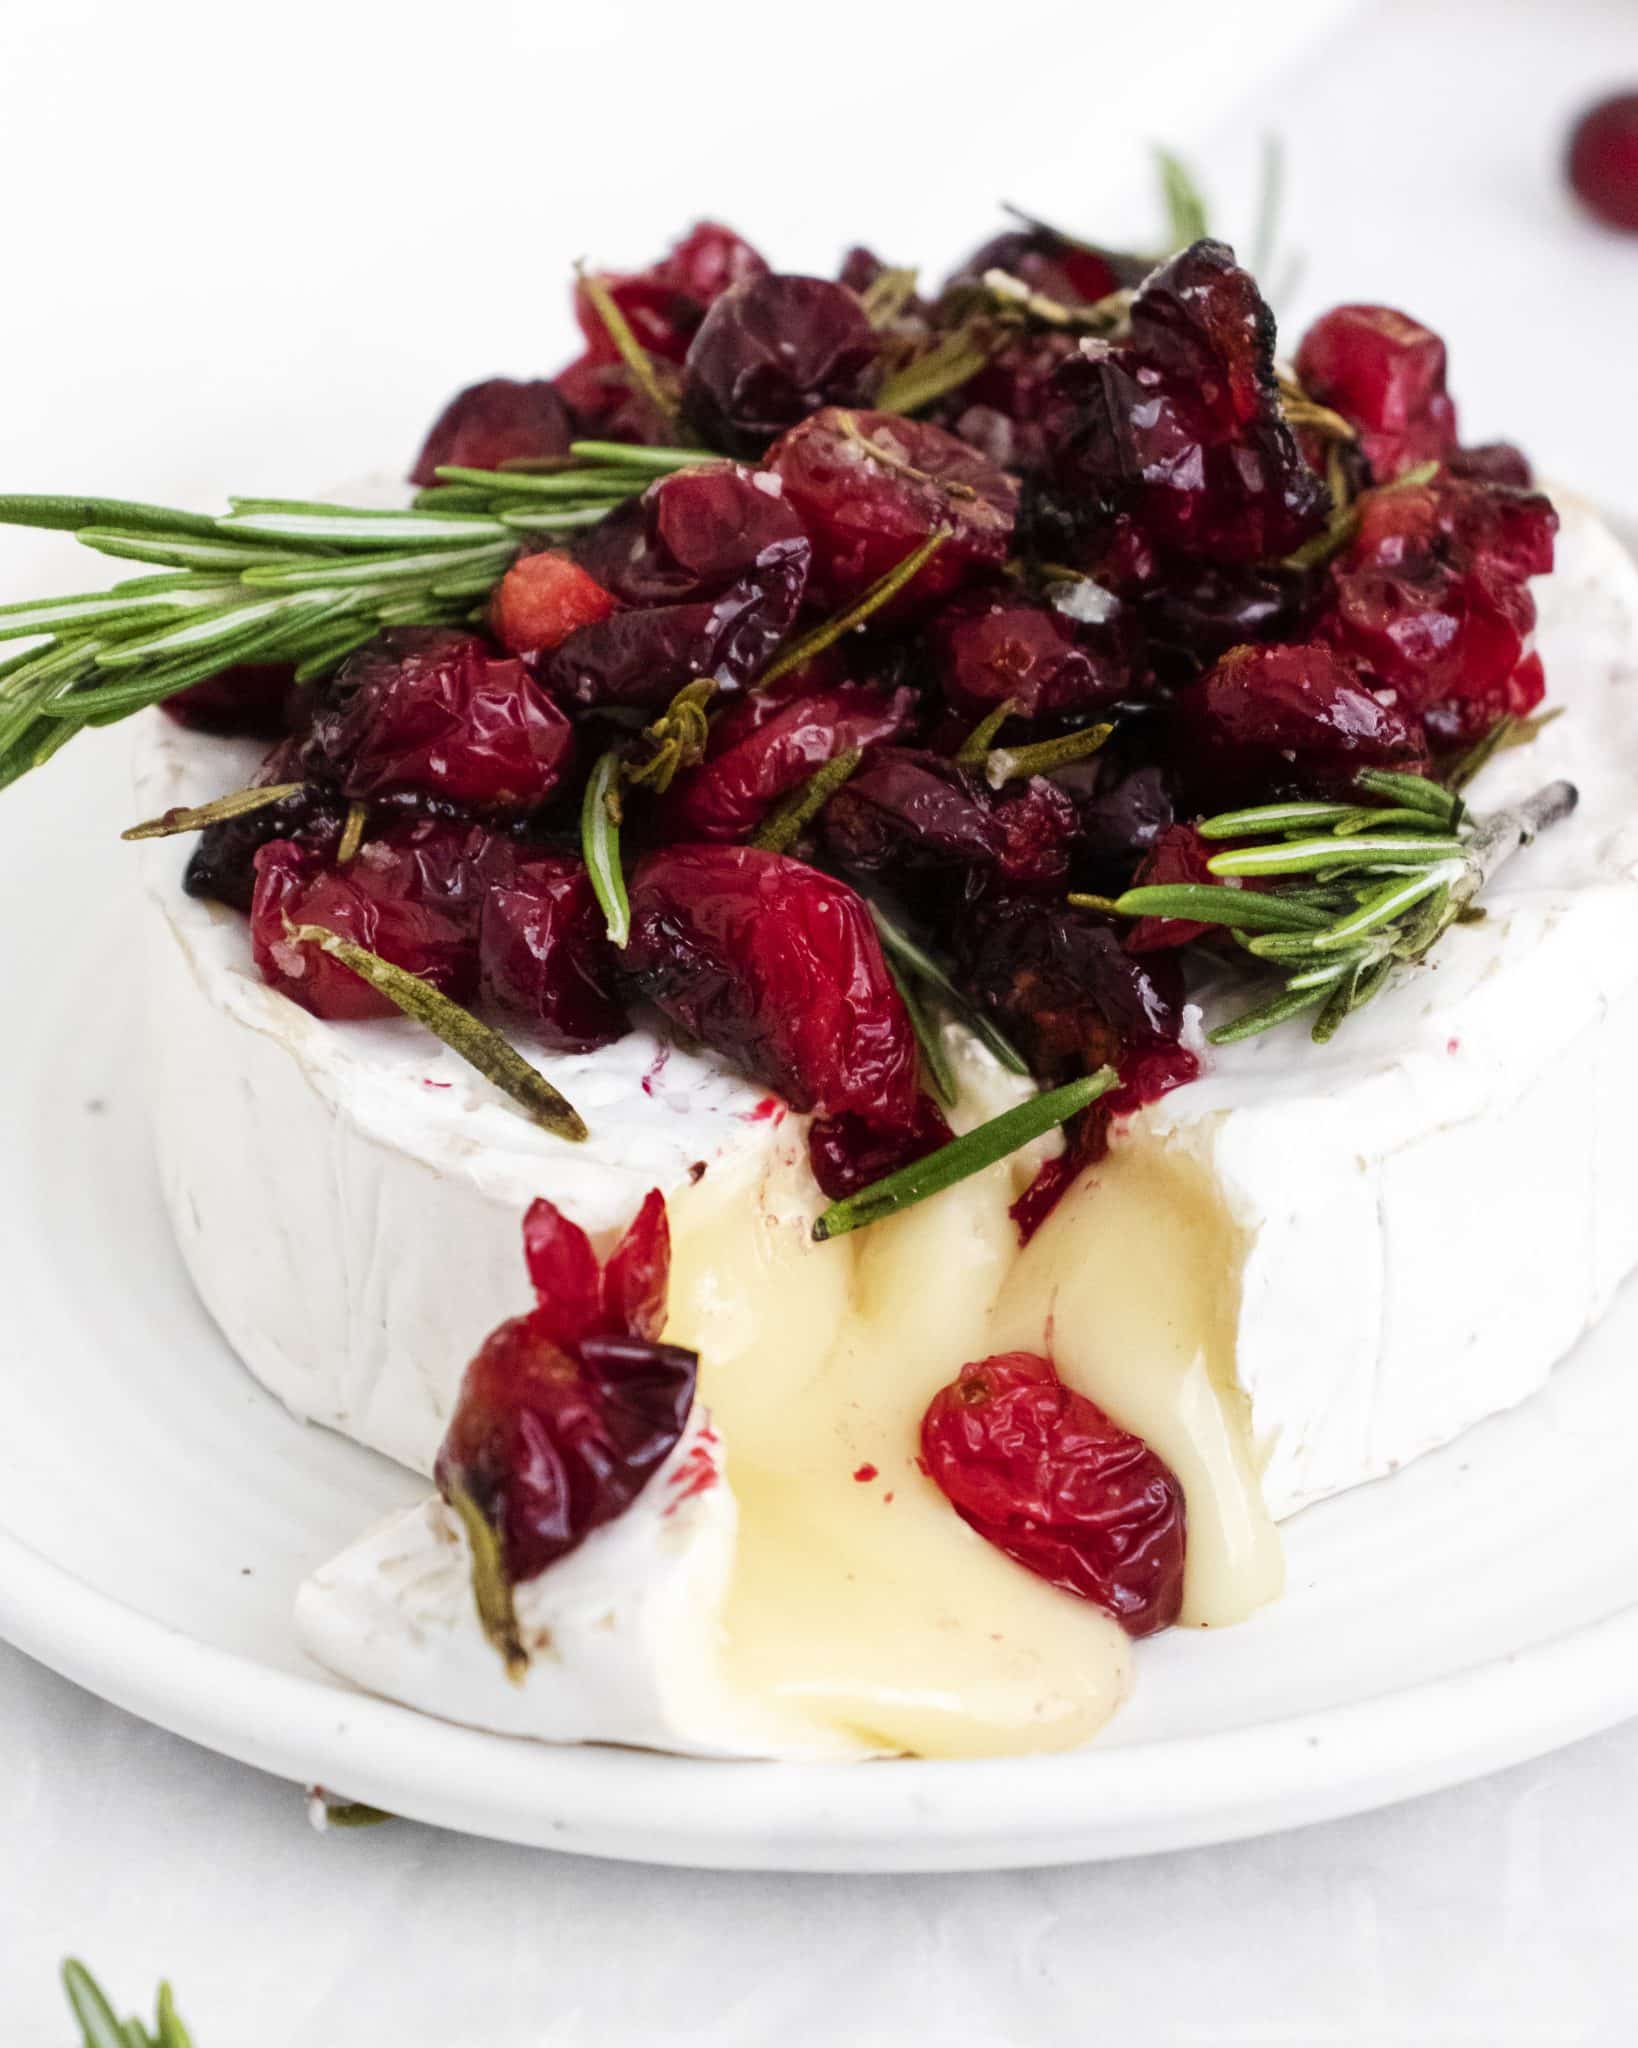 Warm Baked Brie with Savory Roasted Cranberries - The Forked Spoon